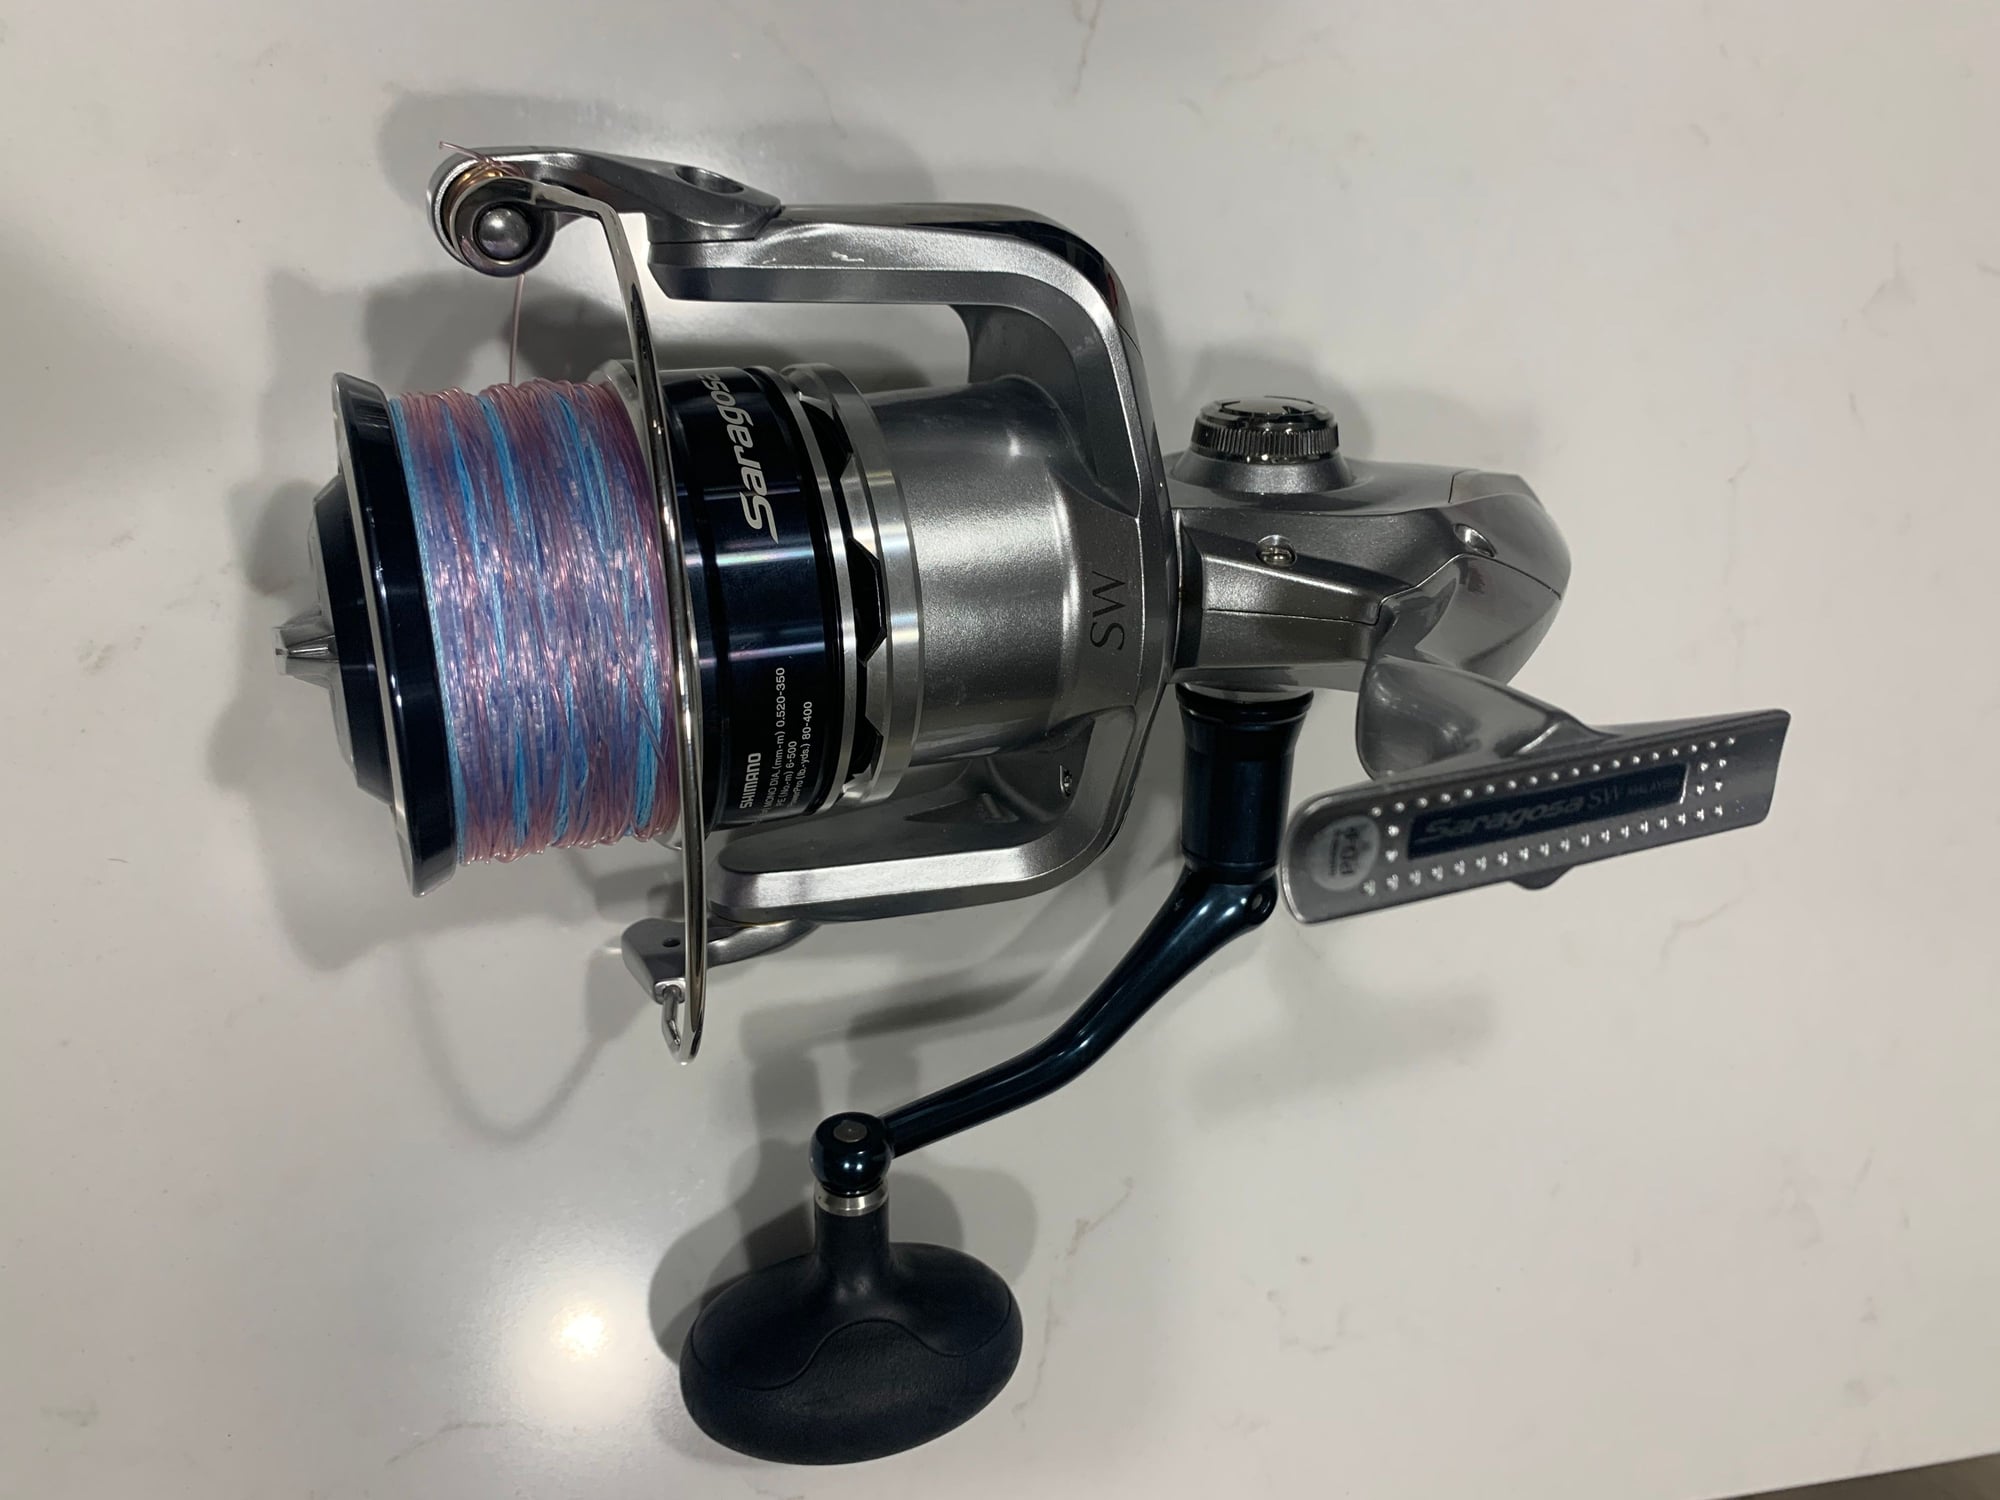 Shimano Saragossa & Fin-Nor Marquesa reels for sale - The Hull Truth - Boating  and Fishing Forum